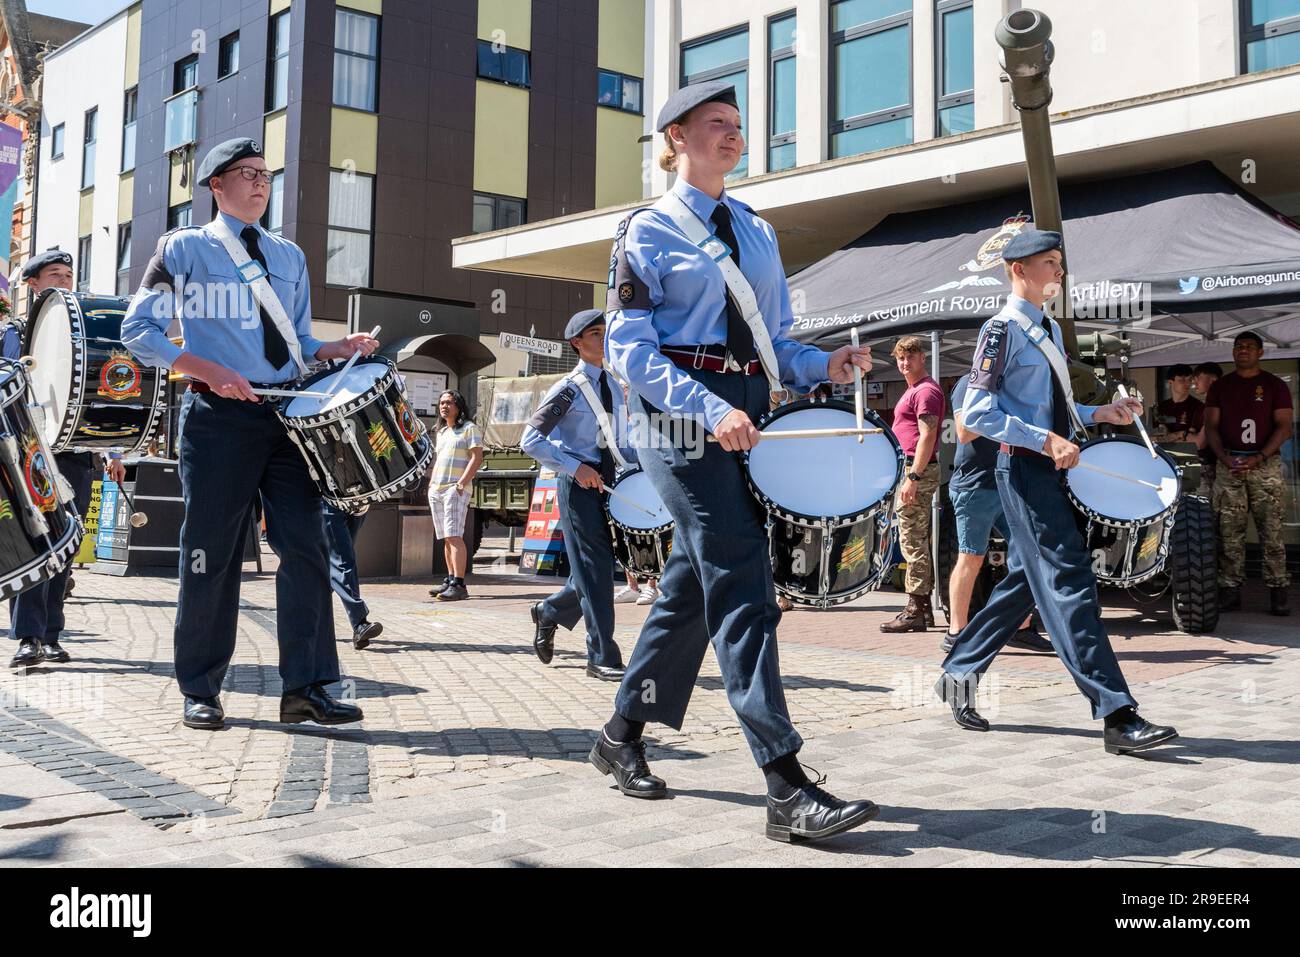 Young drummers of 1312 City of Southend on Sea Squadron Air Cadets band at an Armed Forces Day event in the High Street, Southend on Sea, Essex, UK Stock Photo